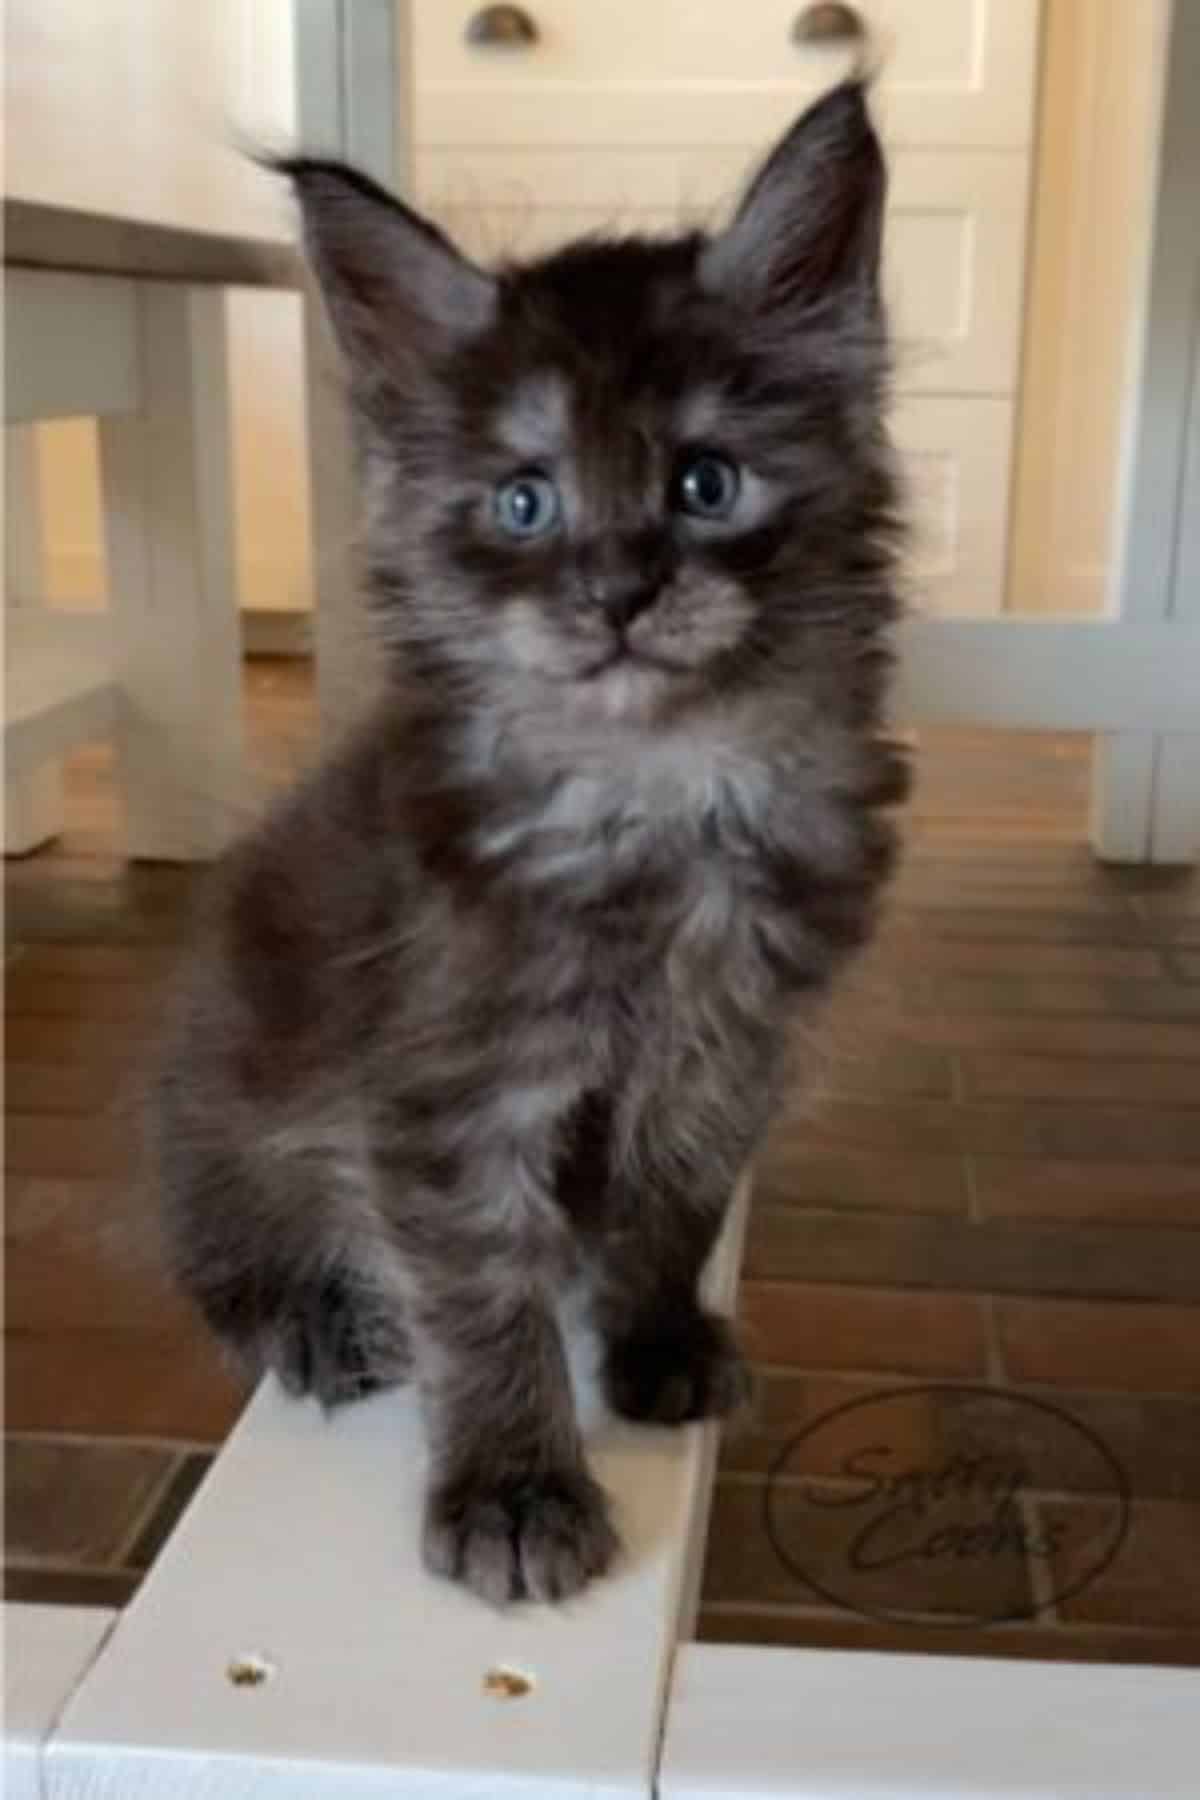 A fluffy black maine coon kitten sitting on a wooden board.